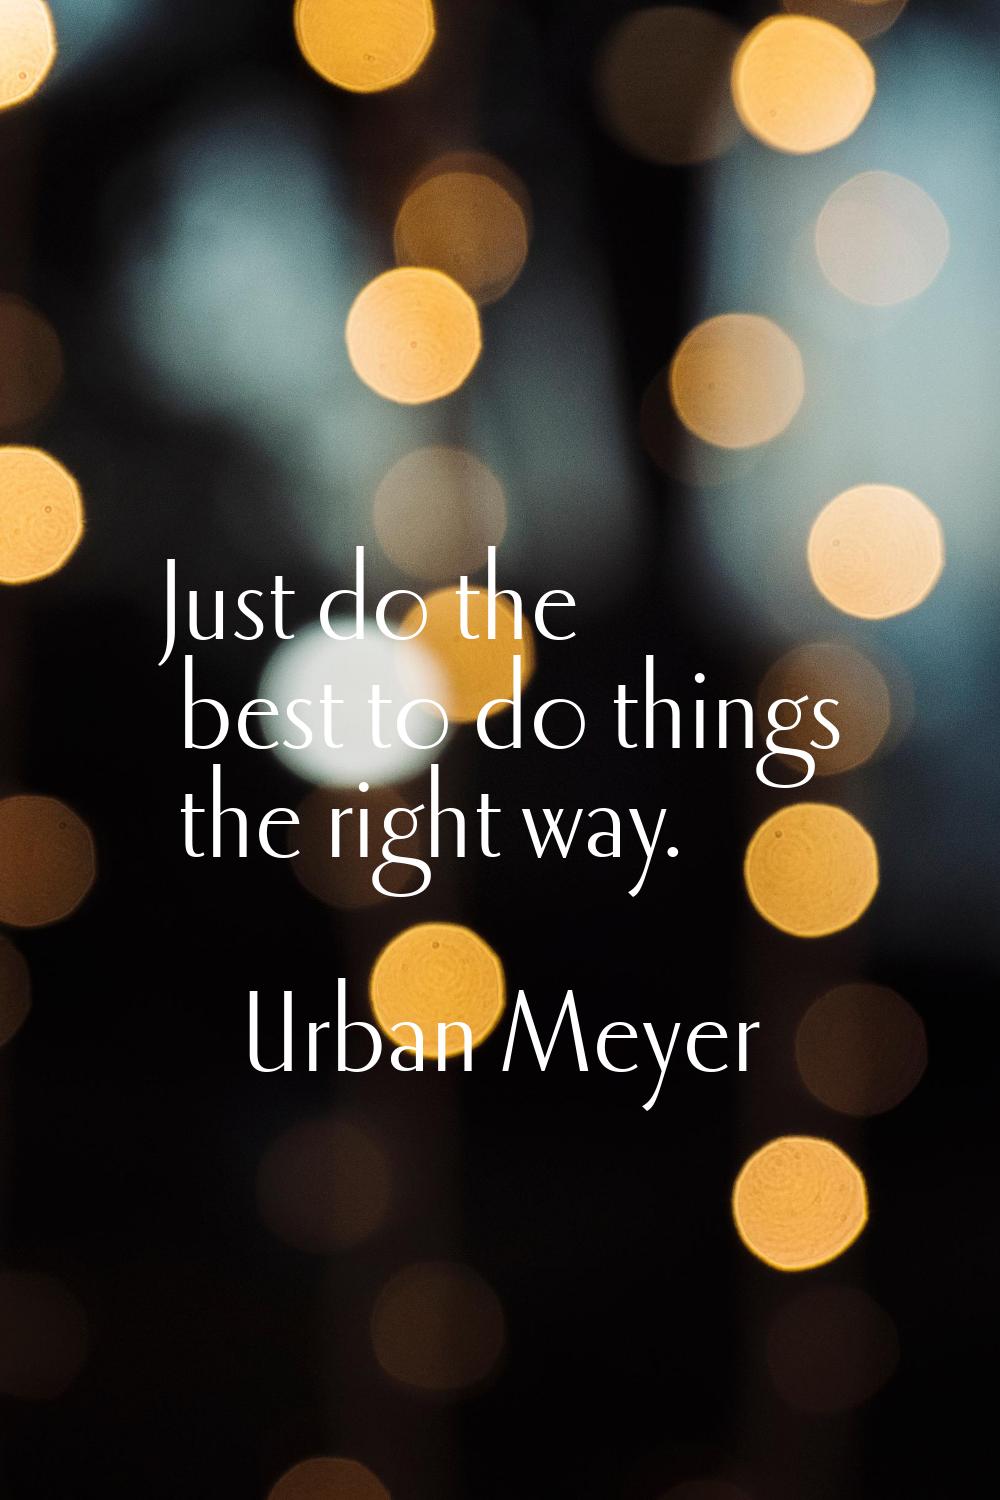 Just do the best to do things the right way.